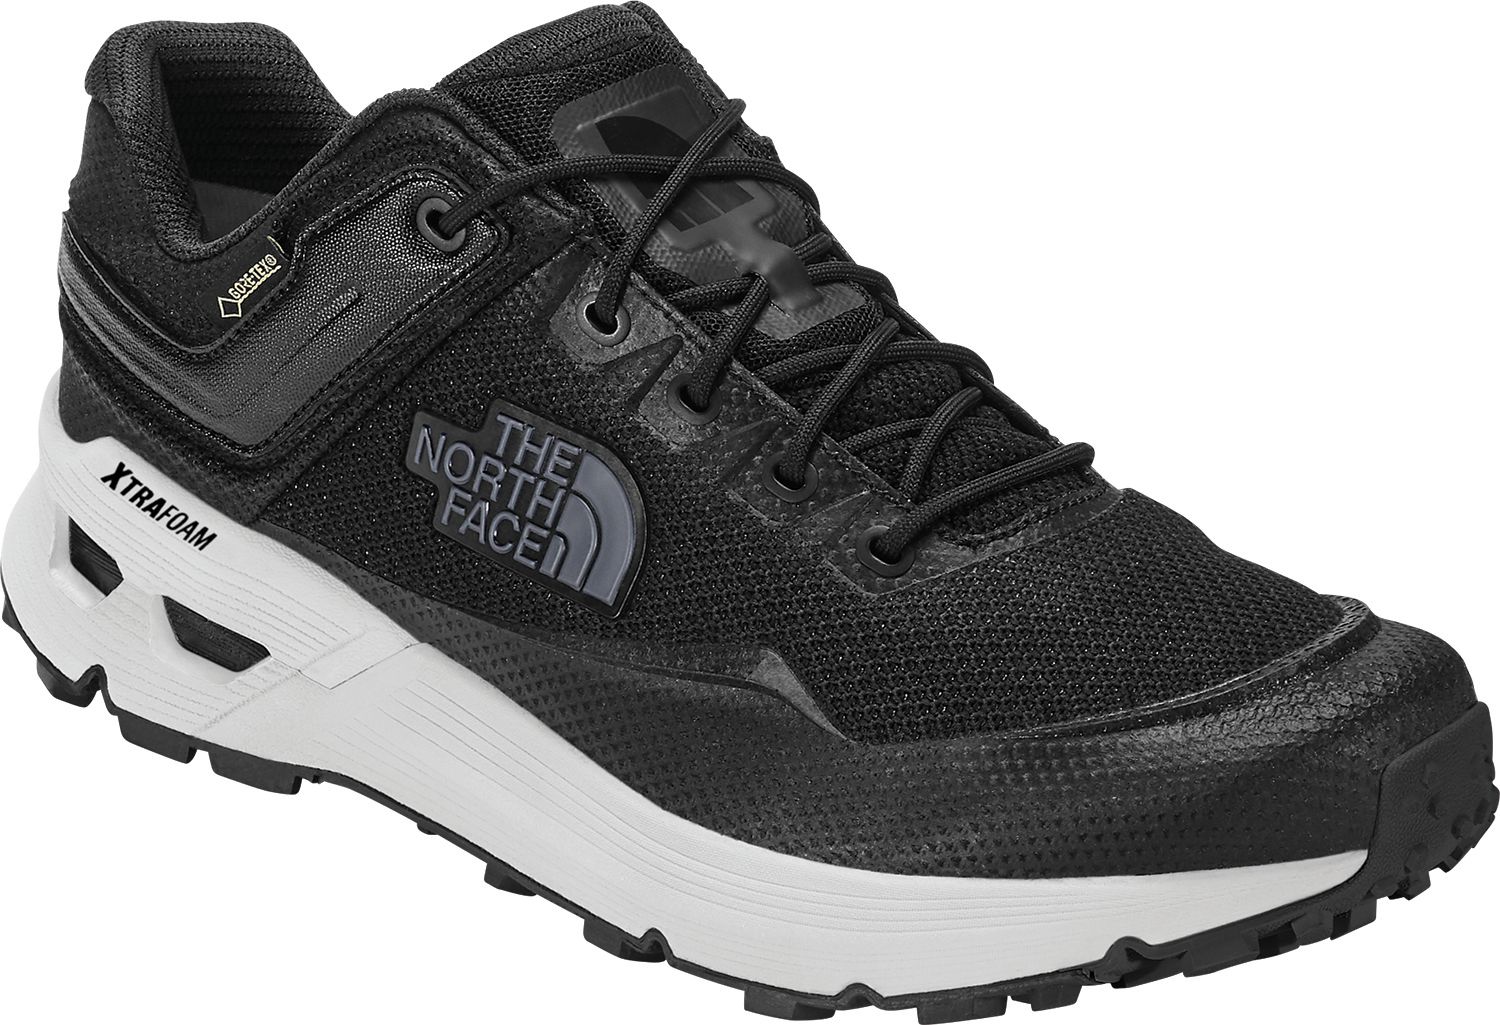 north face safien gtx hiking boot